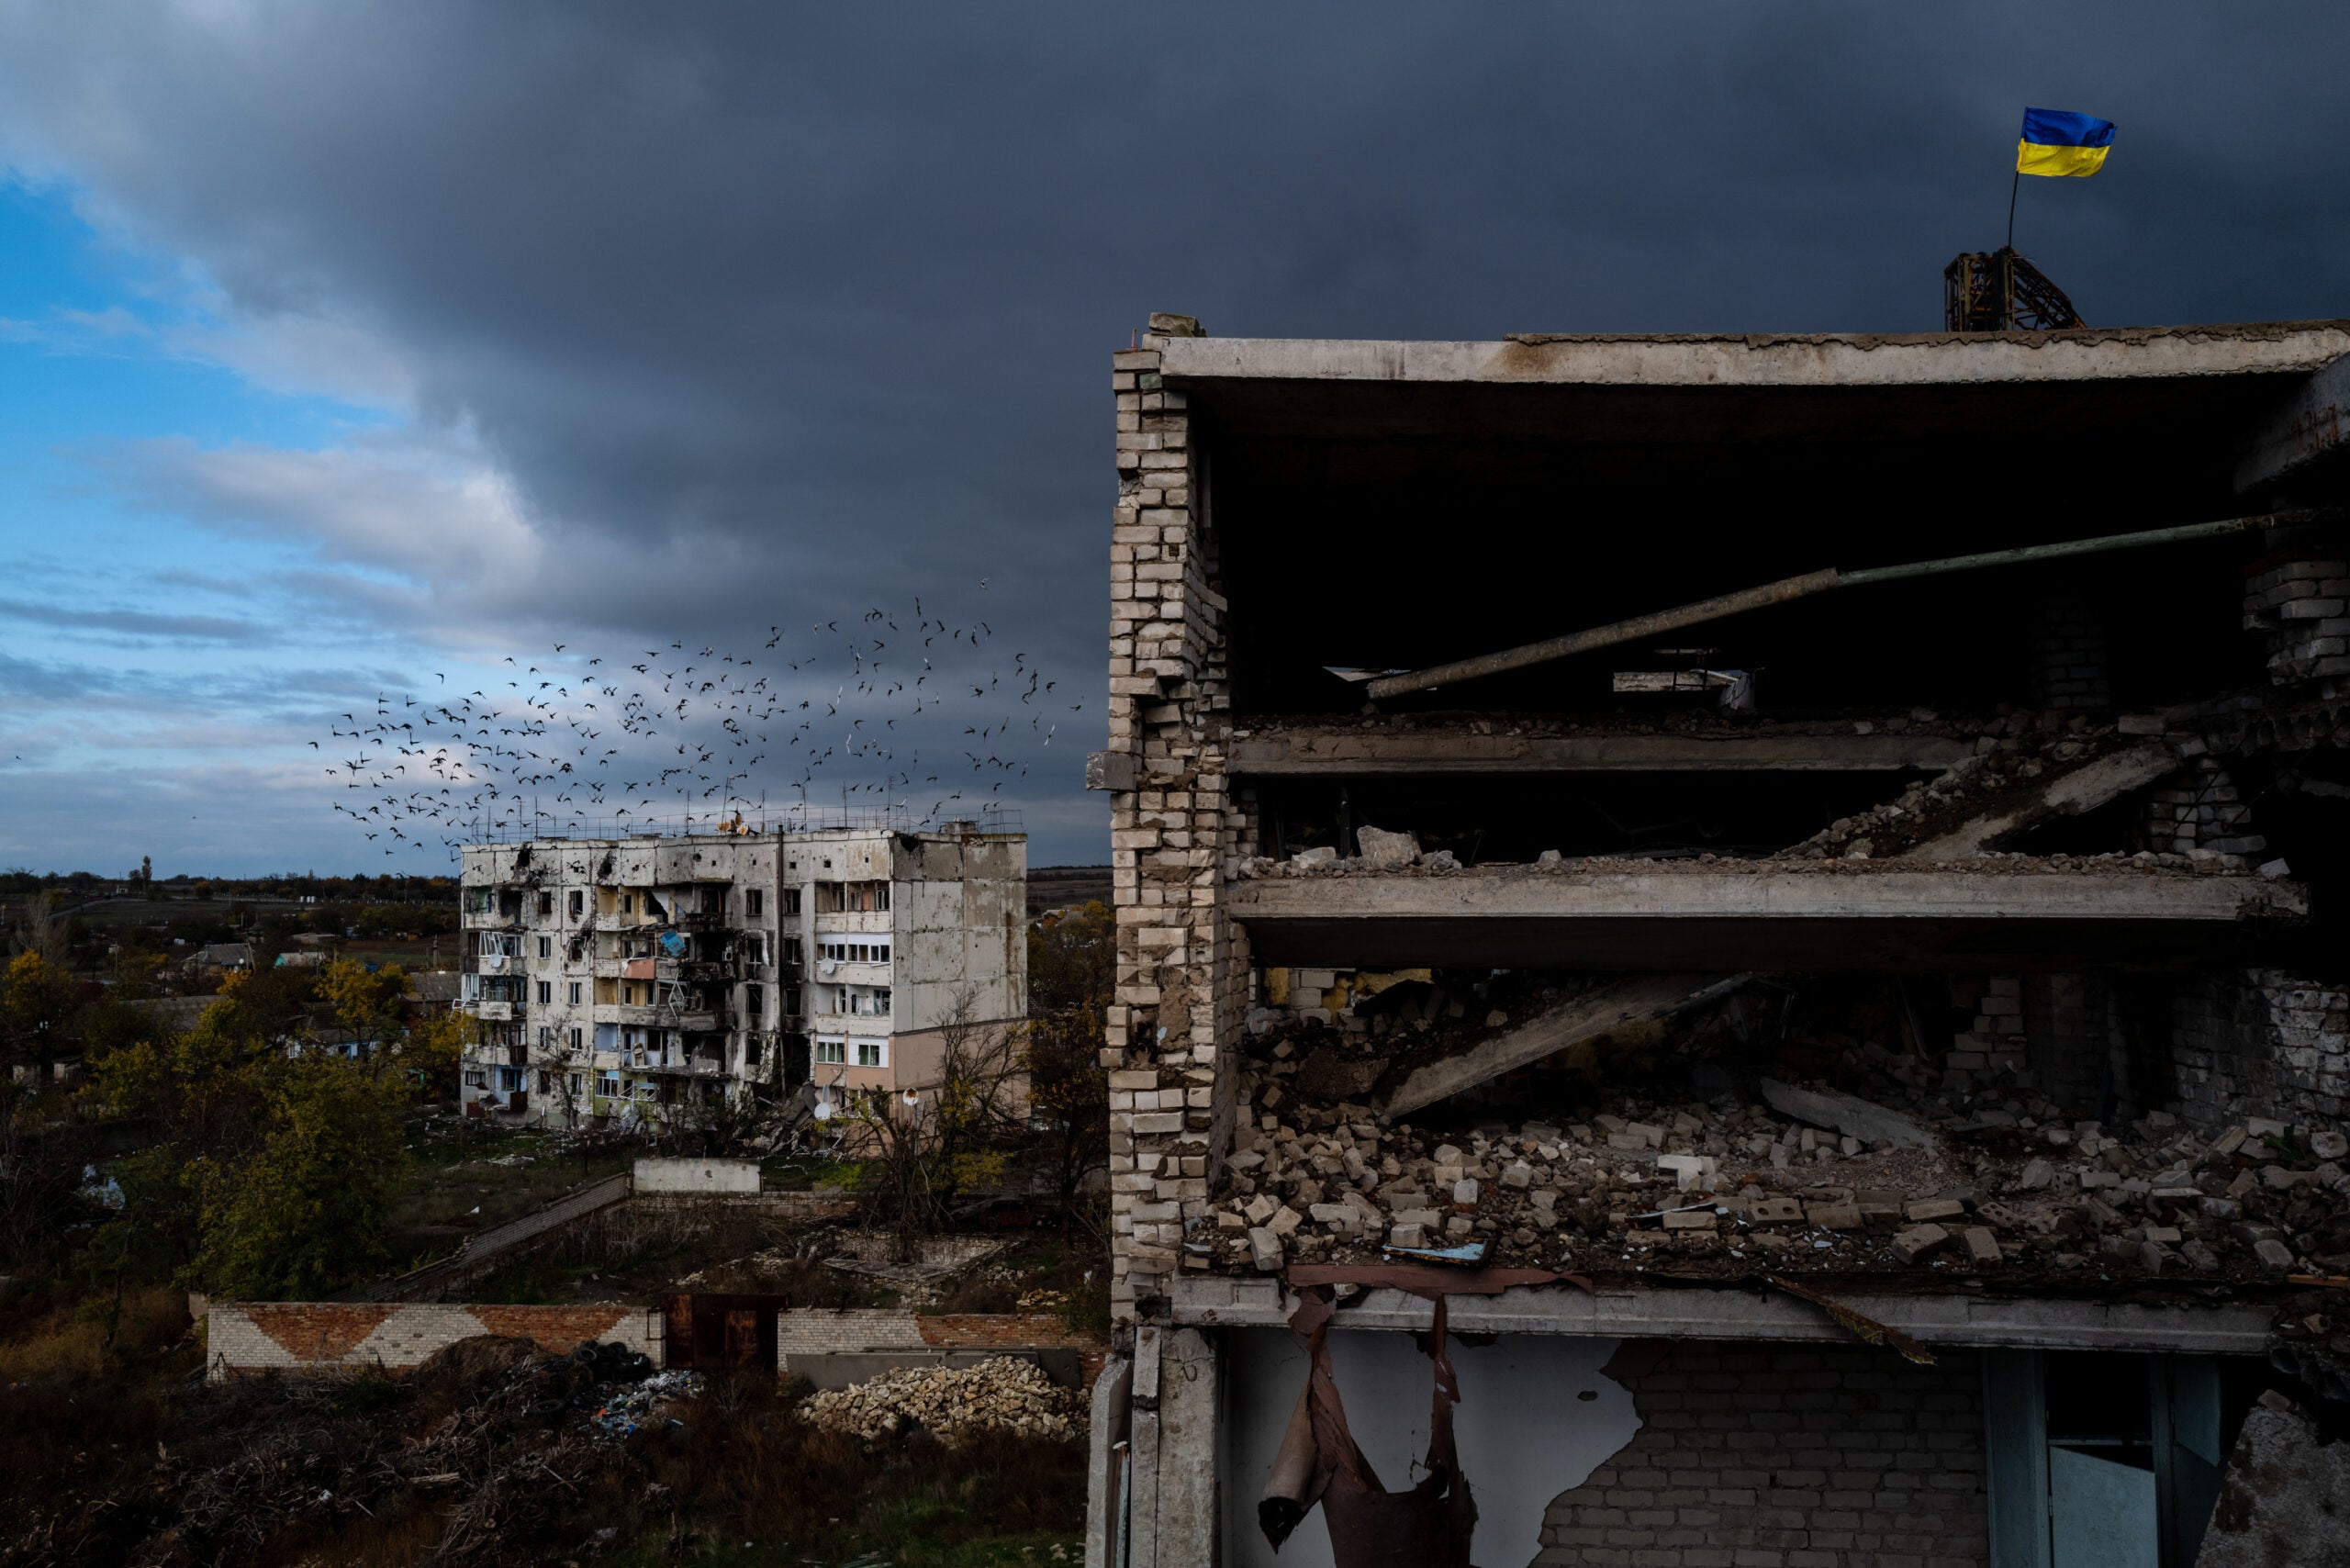 KHERSON, UKRAINE - OCTOBER 26: An apartment building is seen ruined in the recently recaptured village of Archangelske, Kherson Oblast, Ukraine on 26 Oct. 2022 (Photo by Wolfgang Schwan/Anadolu Agency via Getty Images)